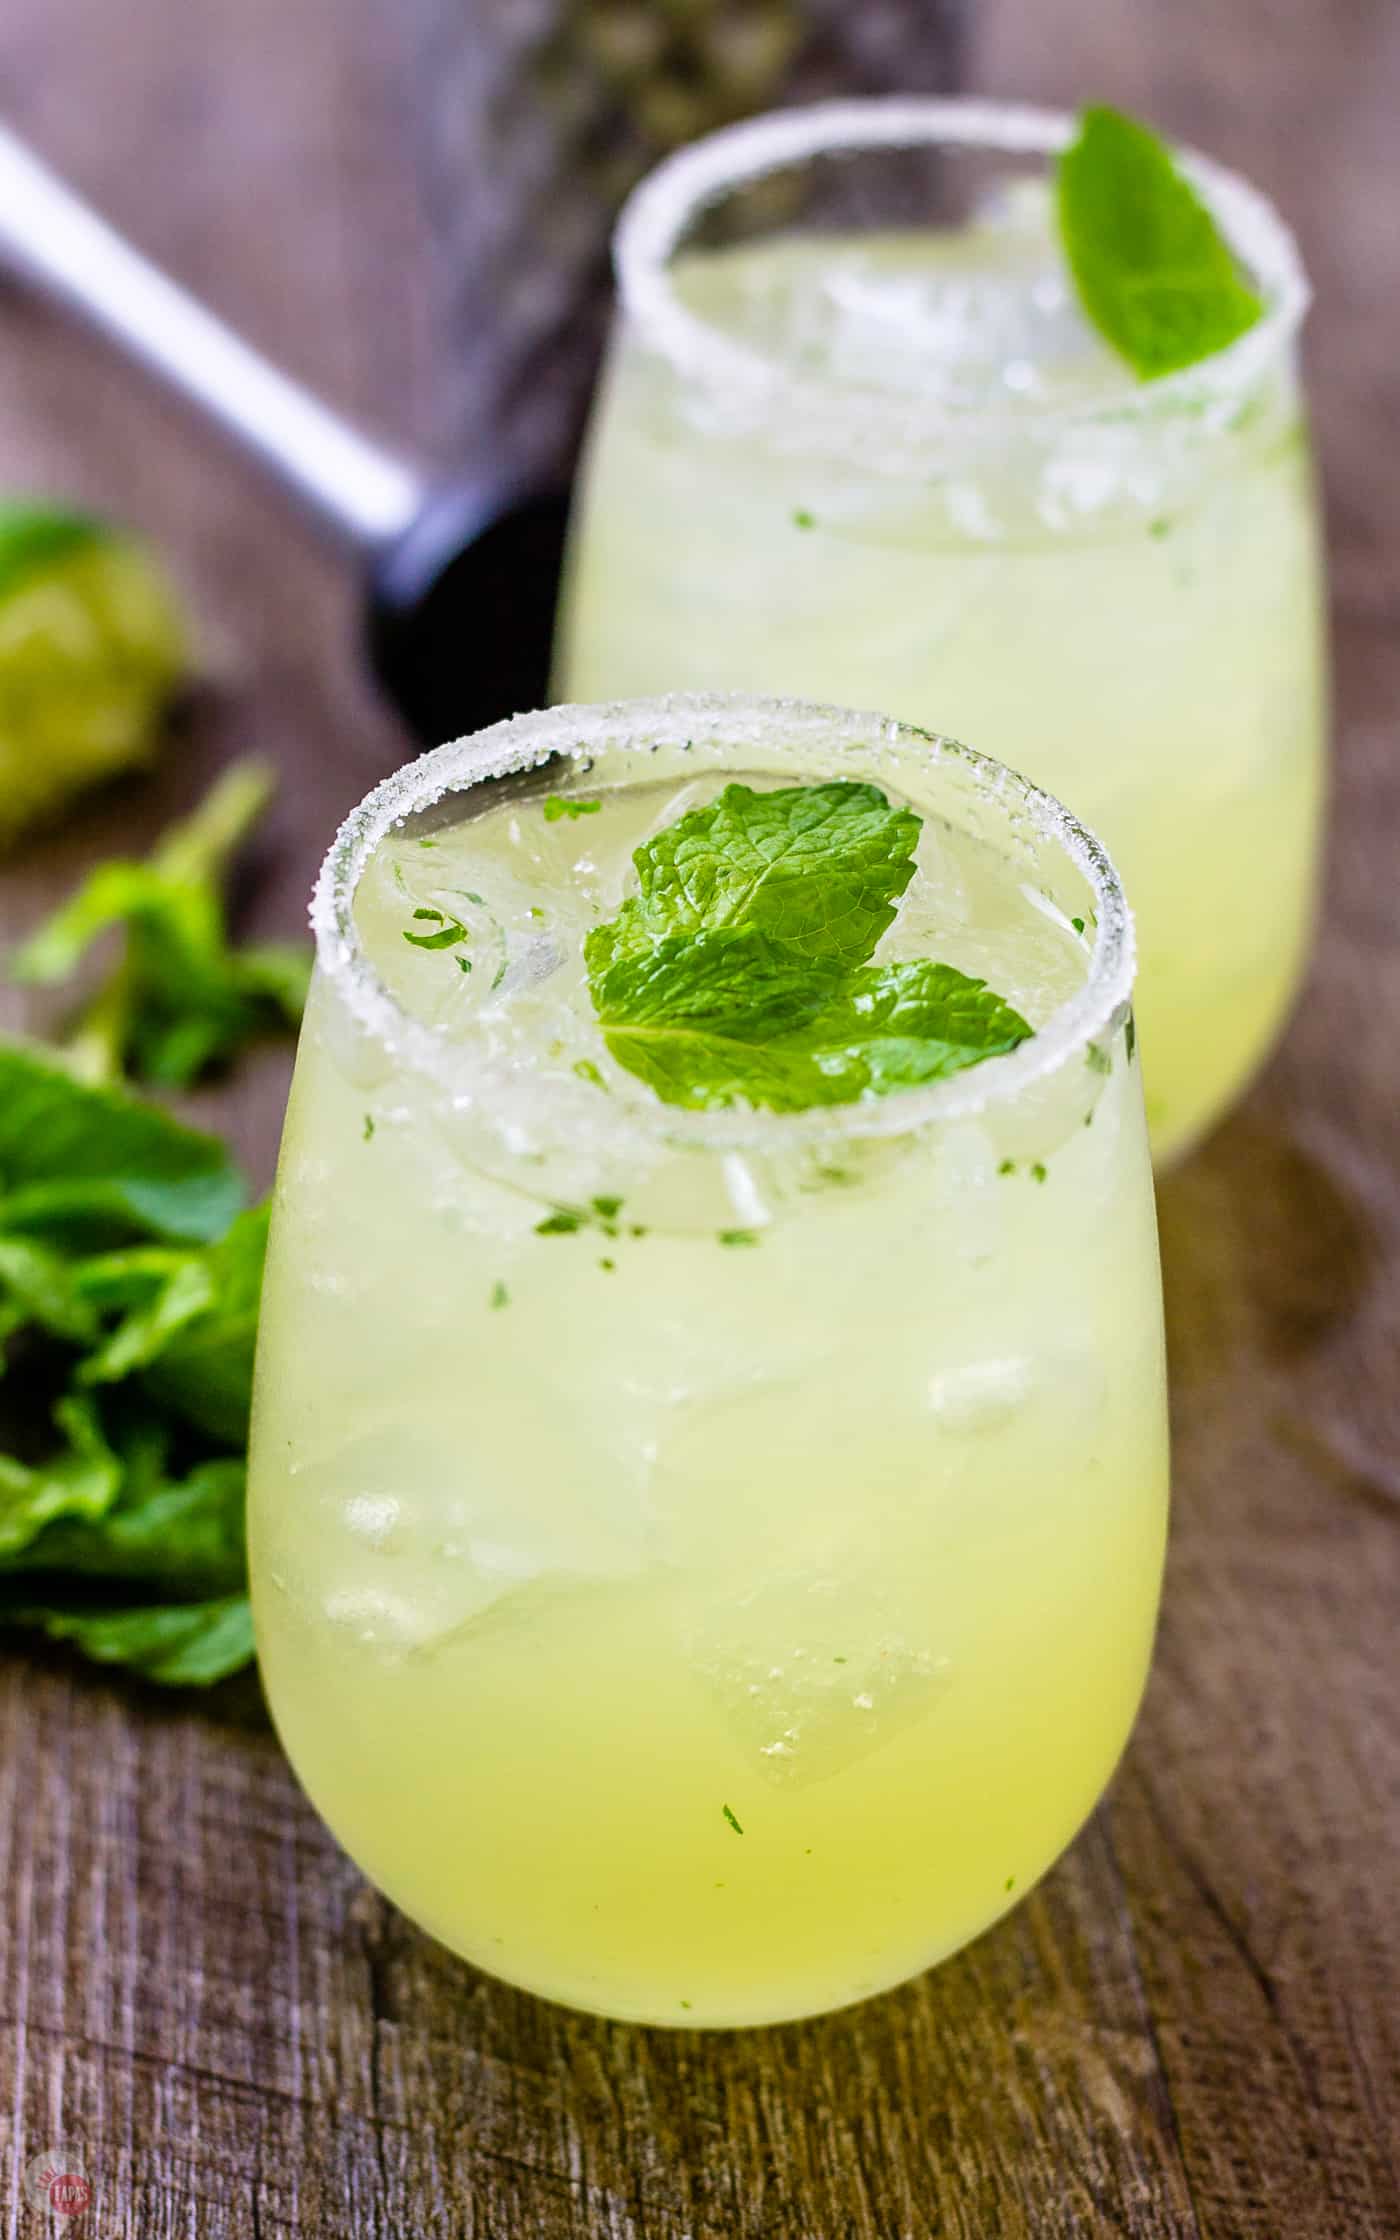 Mariachi Mash - A Lemon Lime Cocktail For the Weekend!